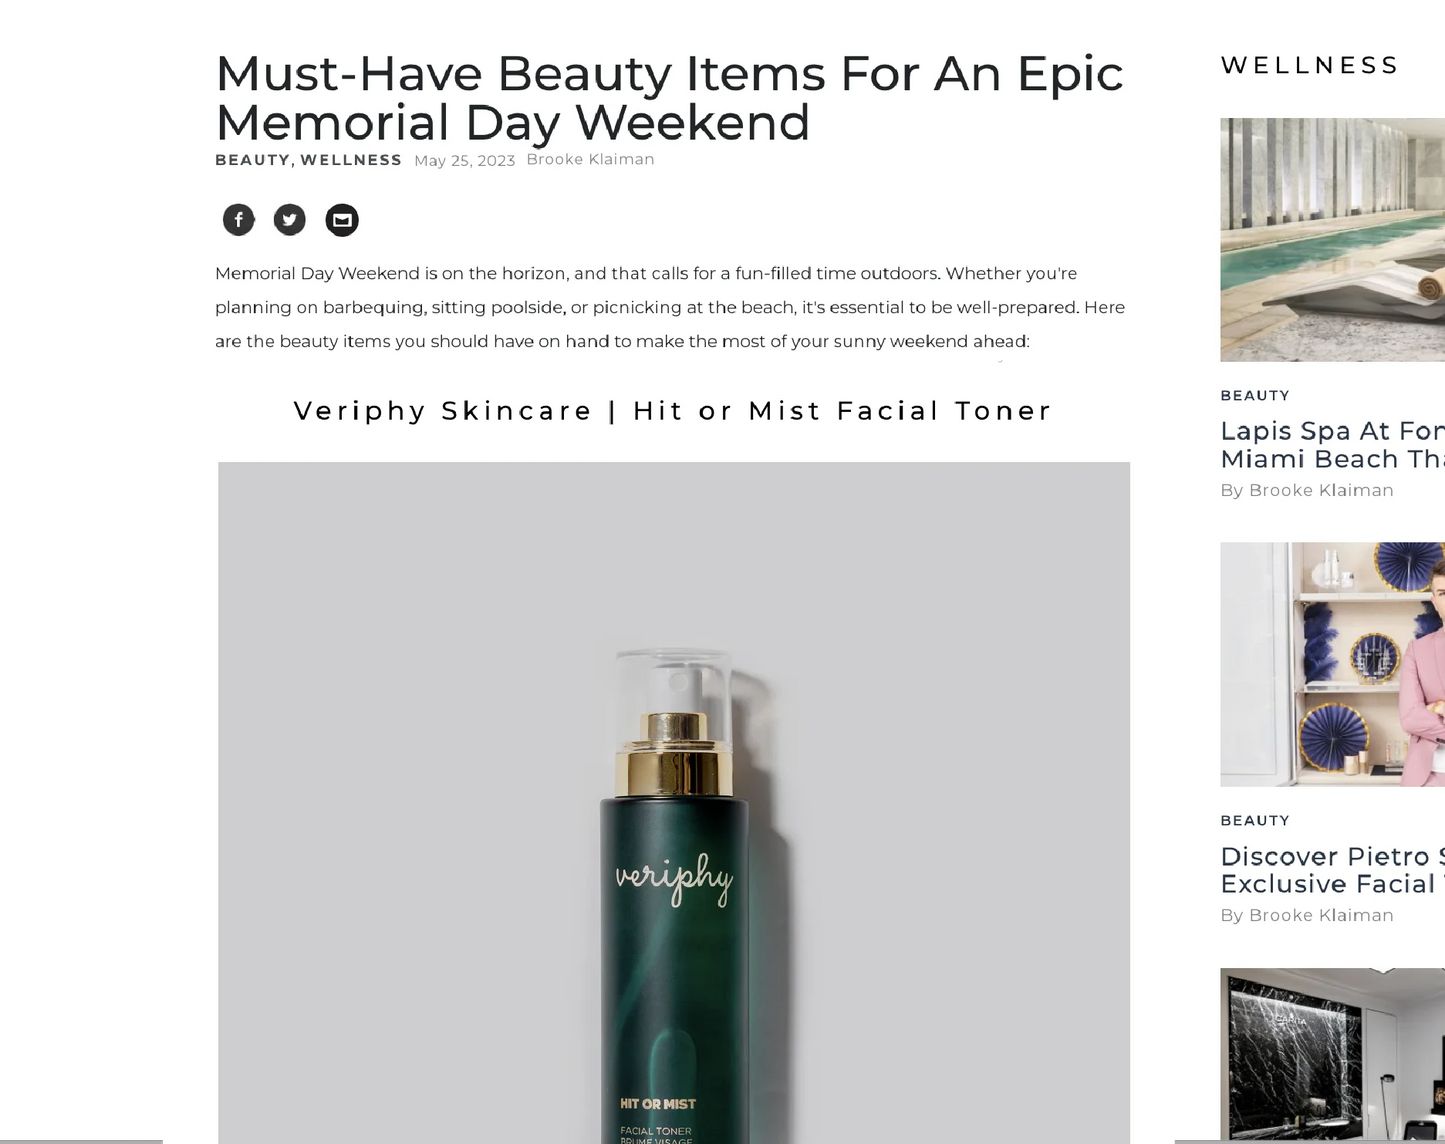 Facial Toner | Veriphy Skincare Product featured in Haute Living Luxury Lifestyle Magazine